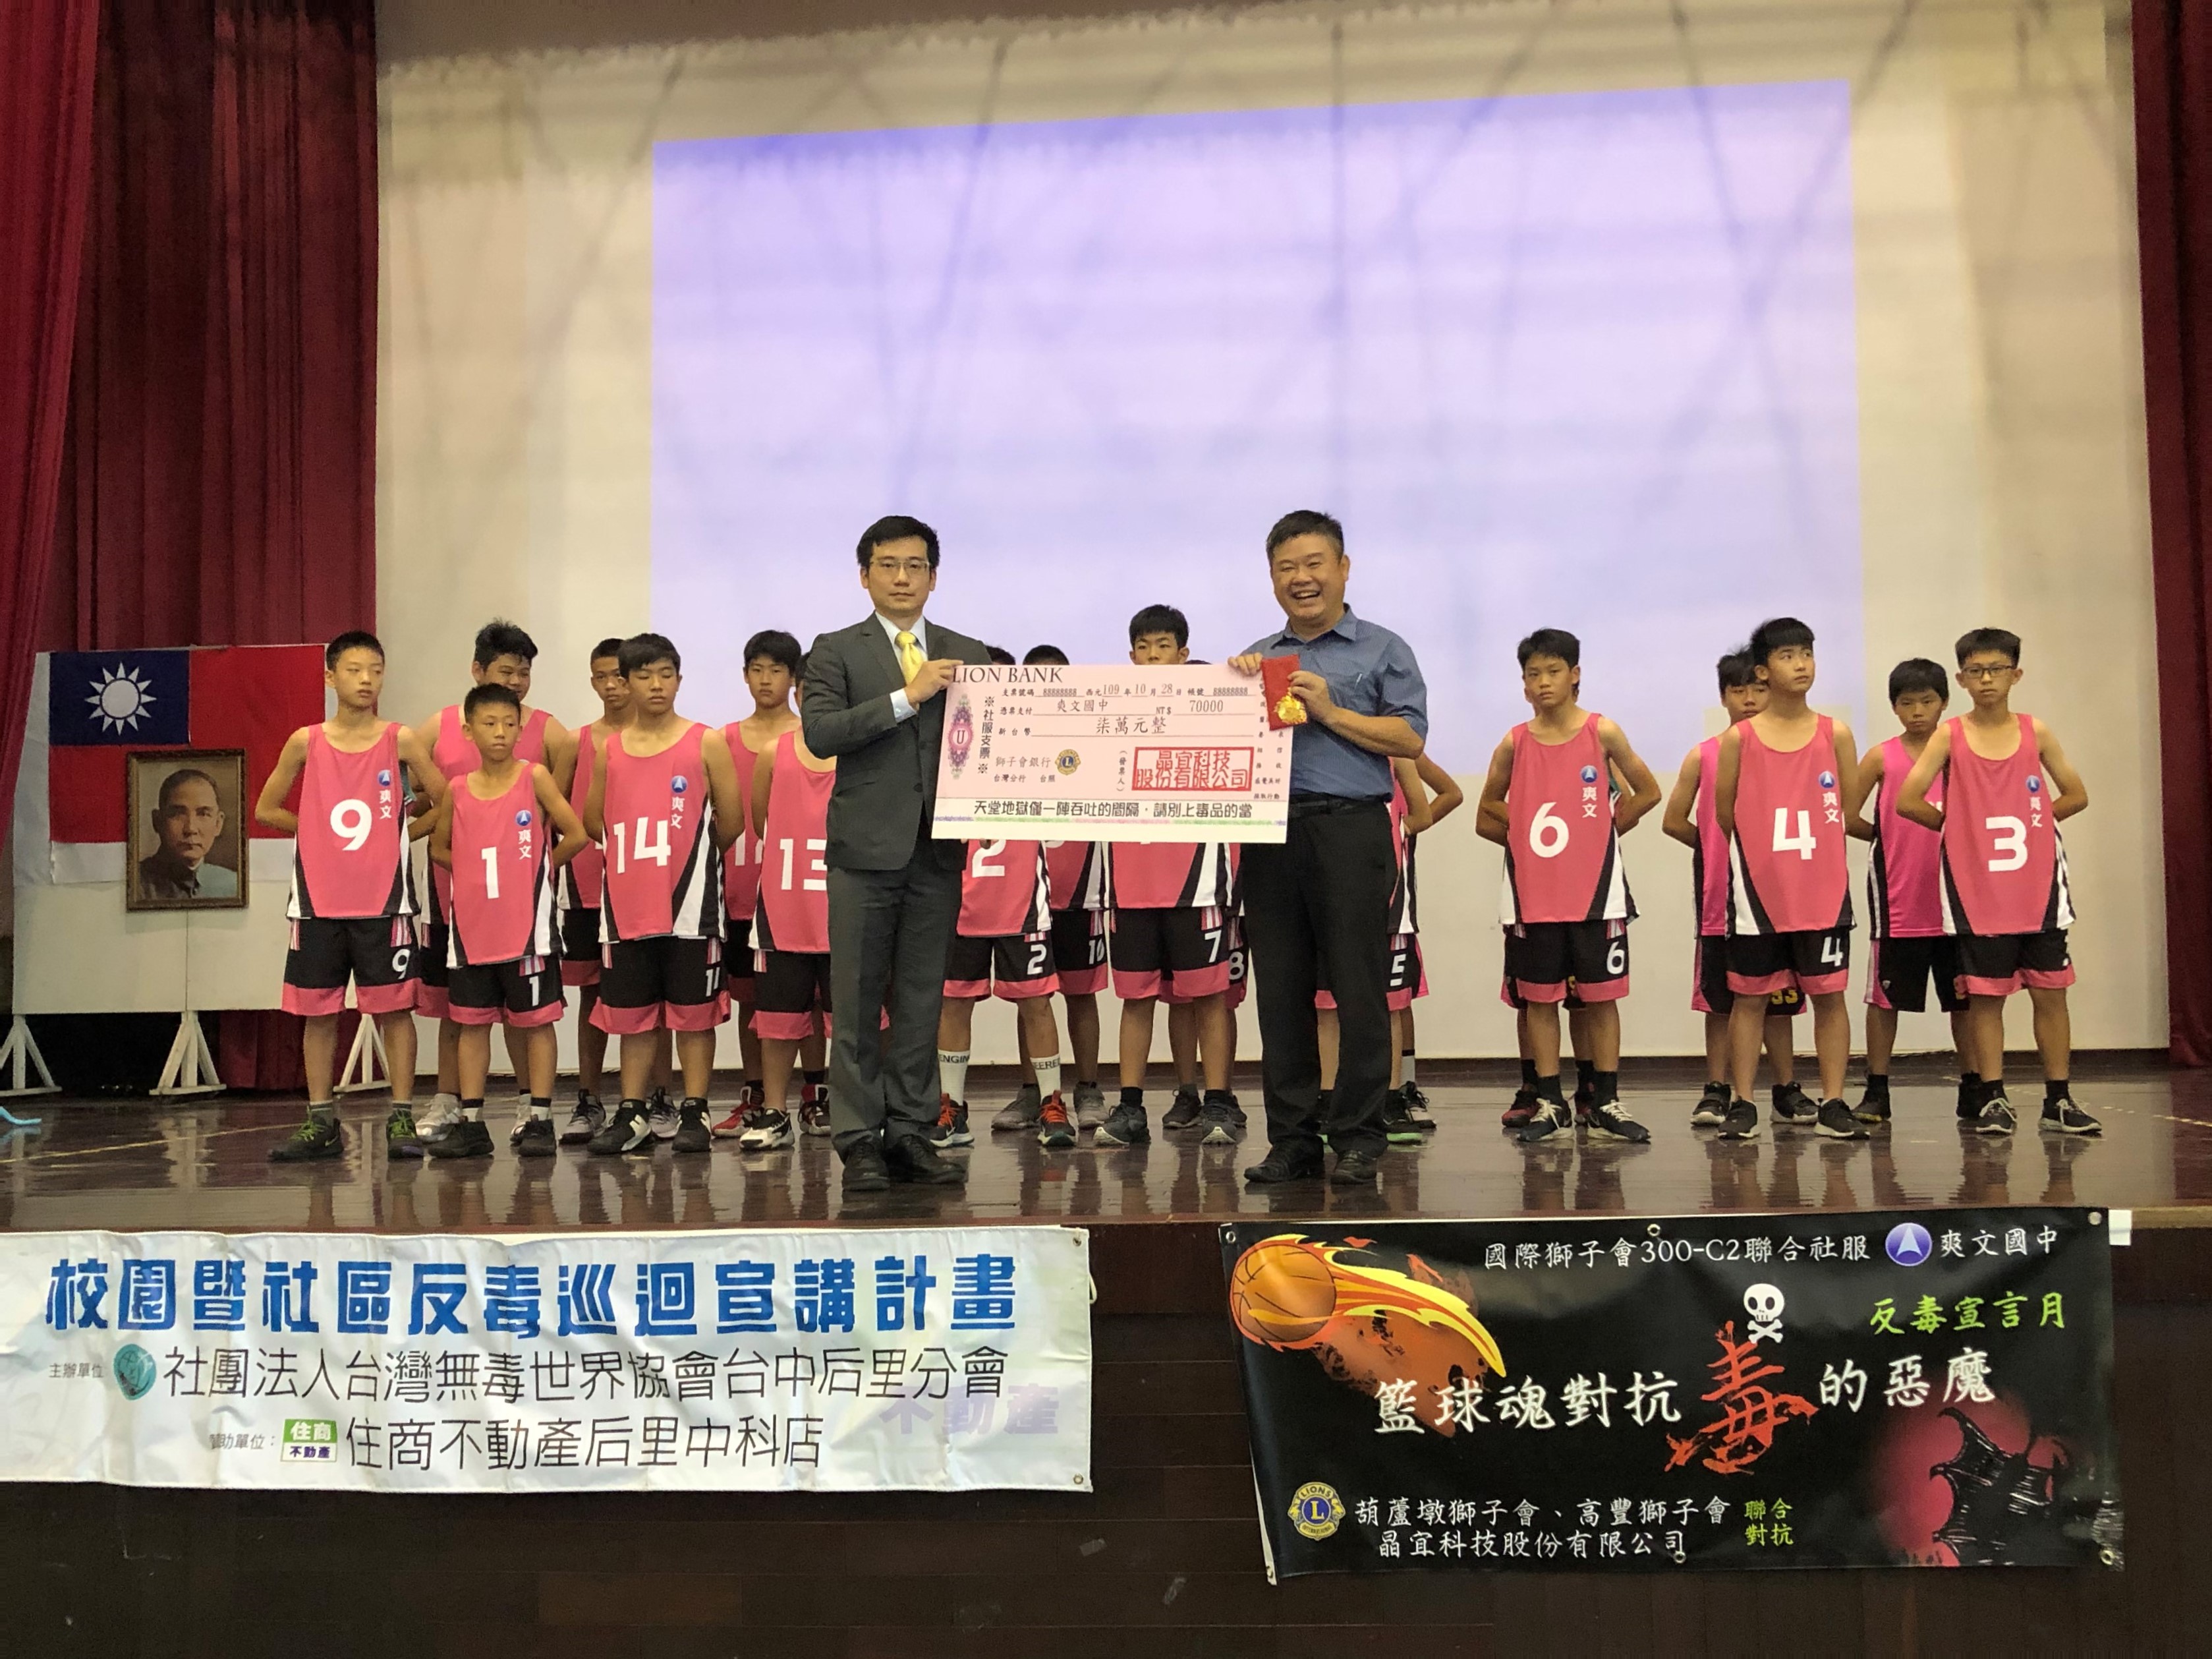 Group photo of Tetrahedron Technology Corporation
 and the principal of Shuang Wen Junior High School